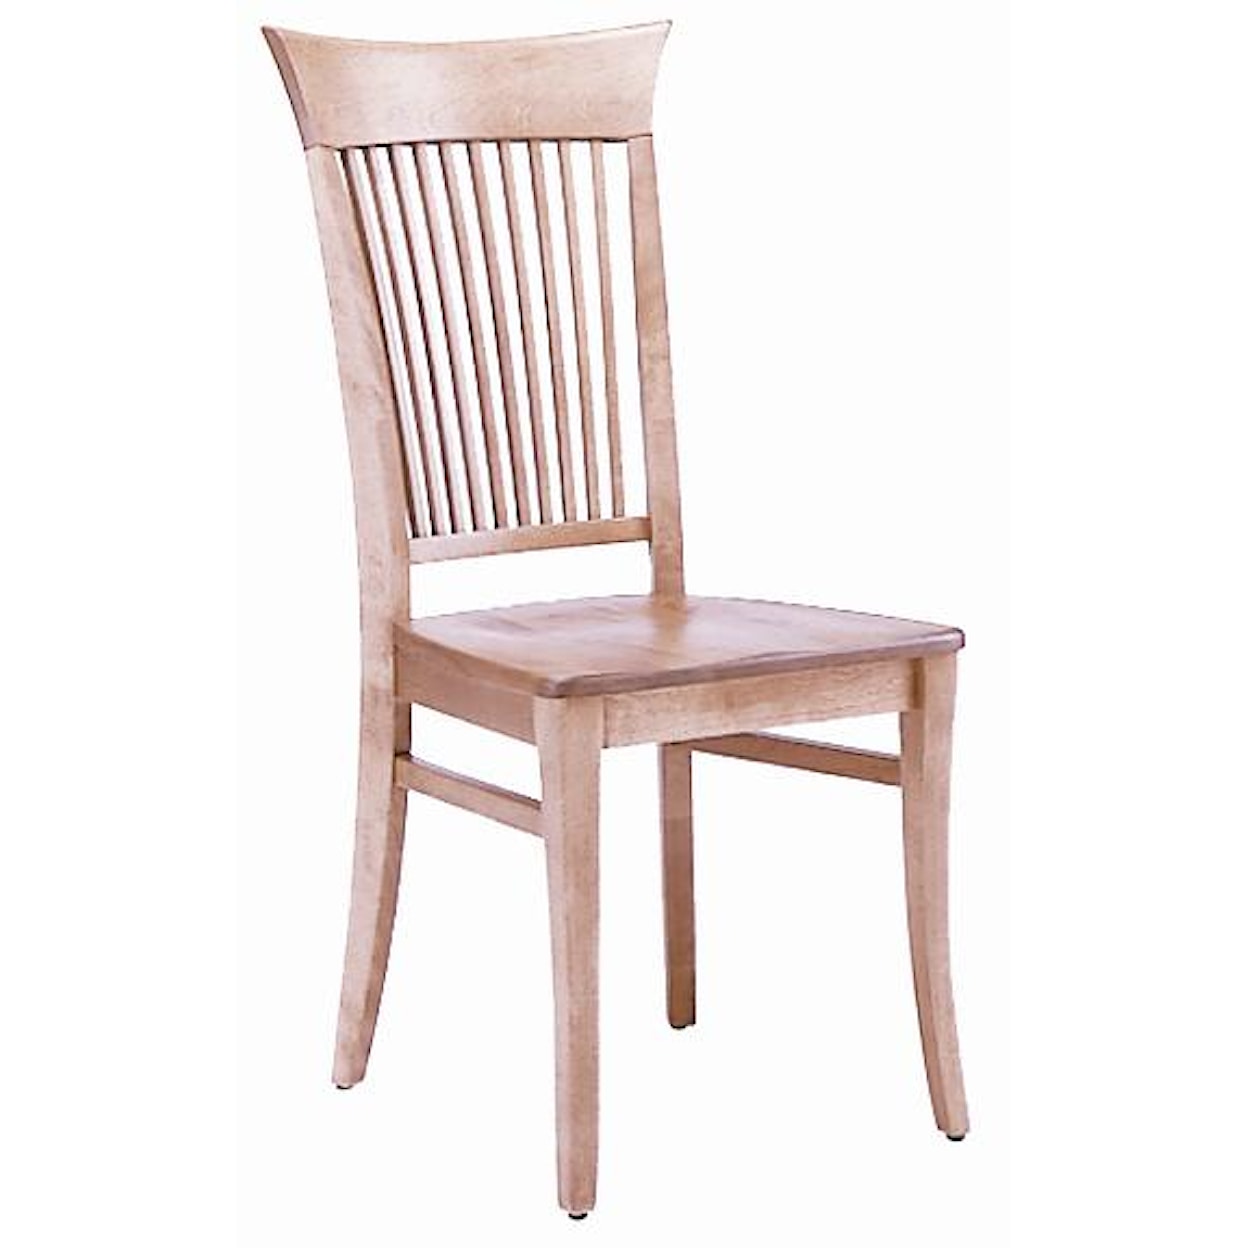 Canadel Canadel Side Chair - Wood Seat